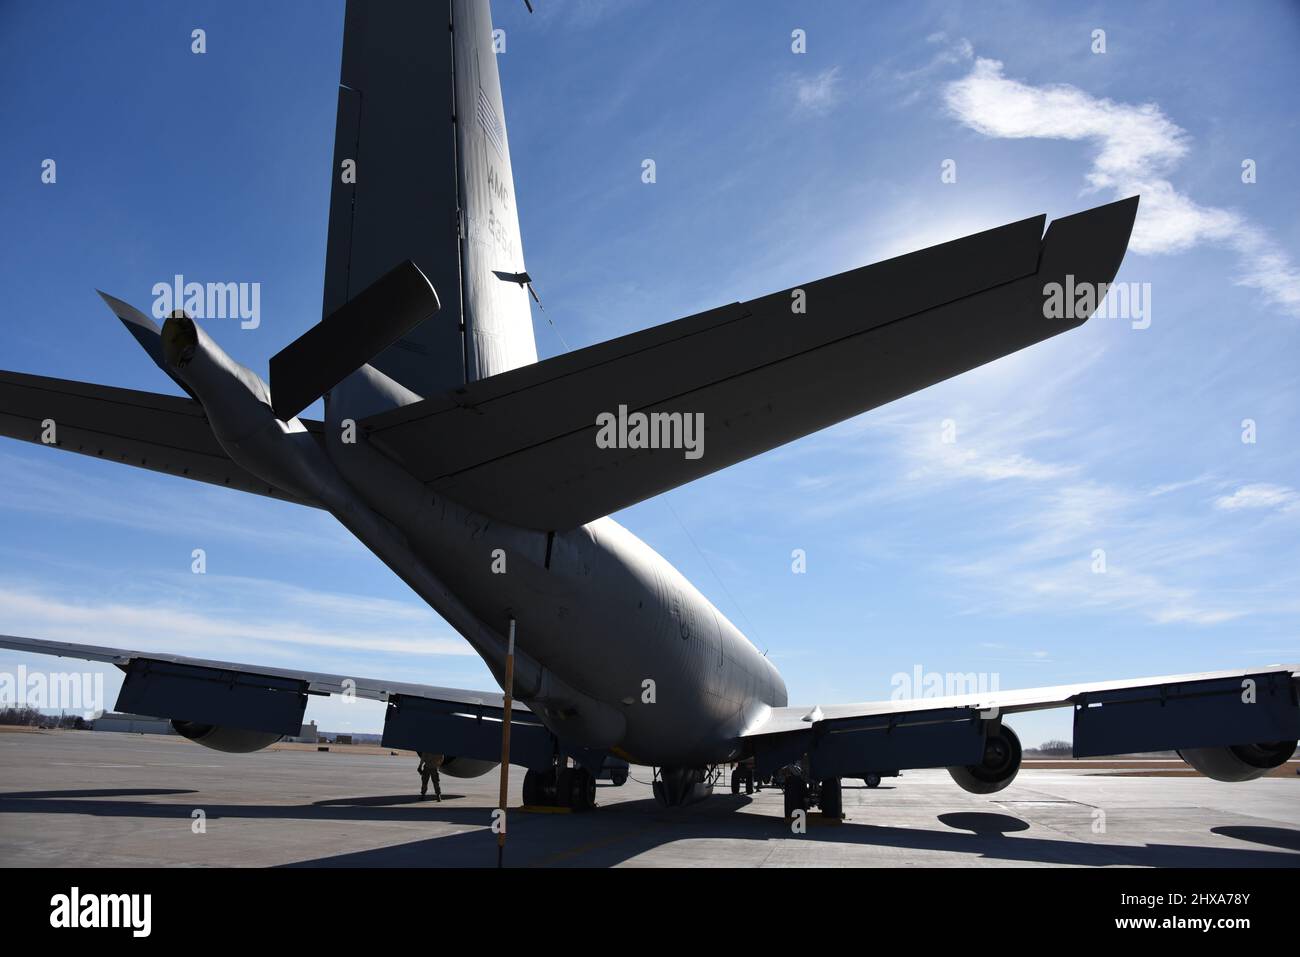 The boom assembly on the tail end of a U.S. Air Force KC-135 on the ramp at the Iowa Air National Guard in Sioux City, Iowa on March 1, 2022. U.S. Air National Guard photo Senior Master Sgt. Vincent De Groot 185th ARW Wing PA Stock Photo